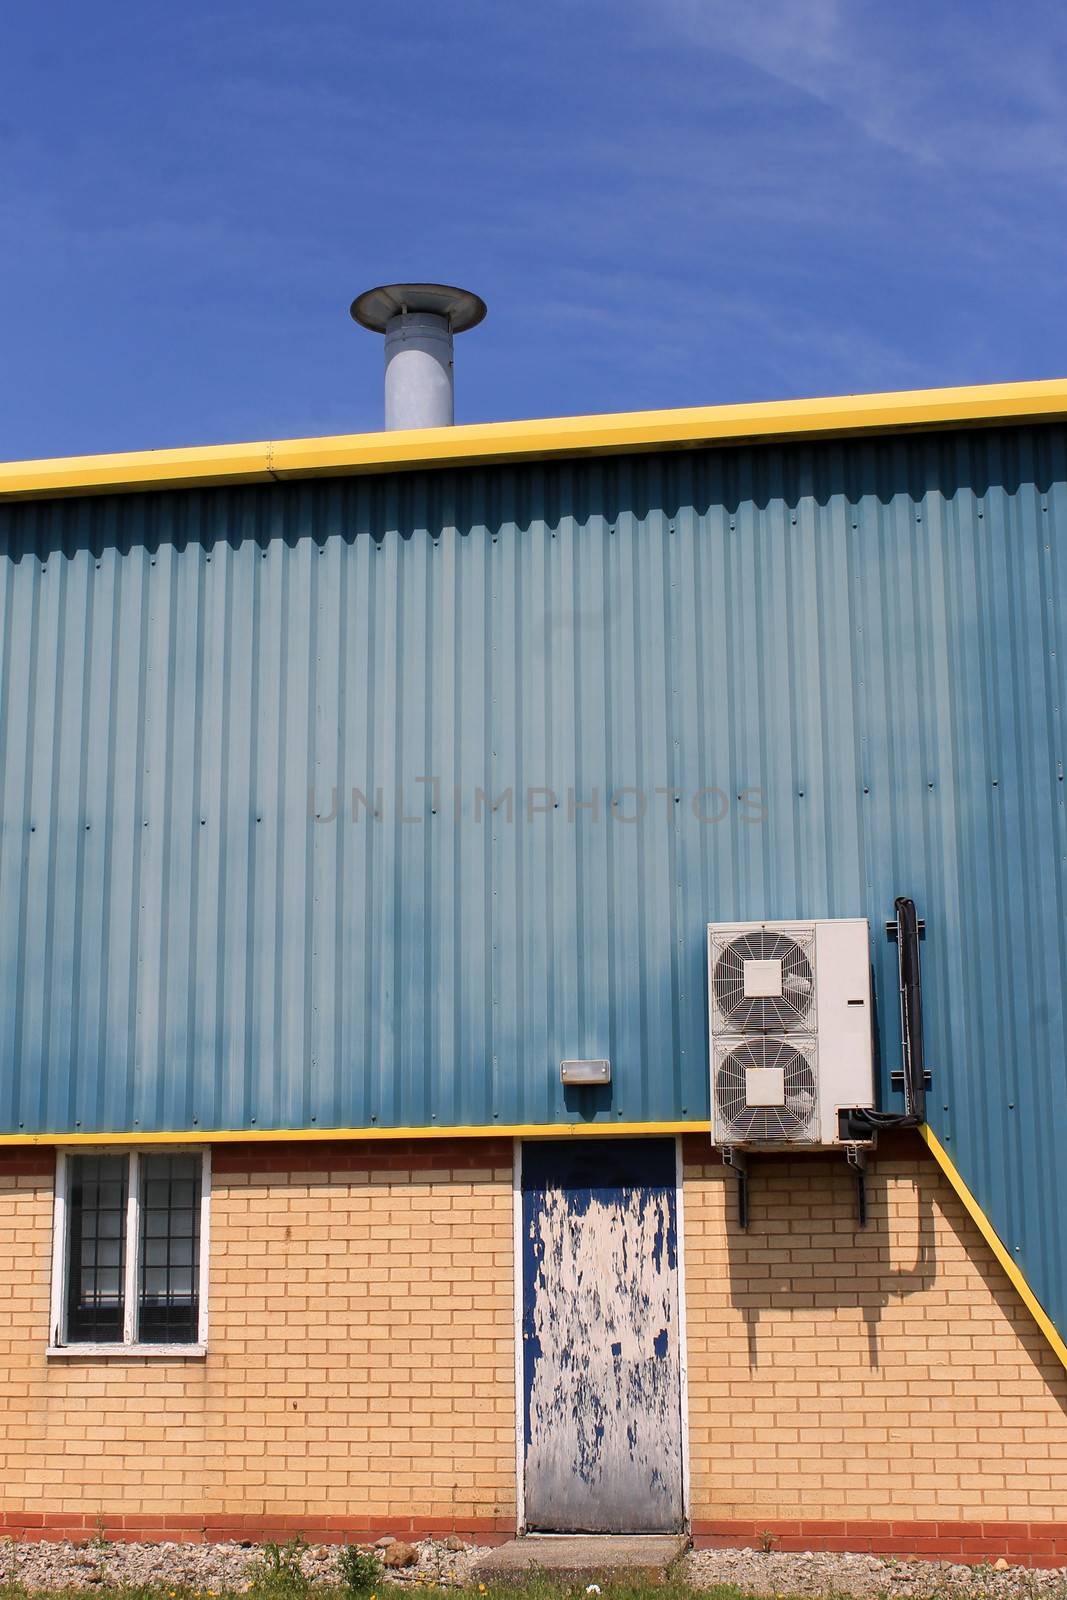 Air conditioing unit on exterior of warehouse building.
